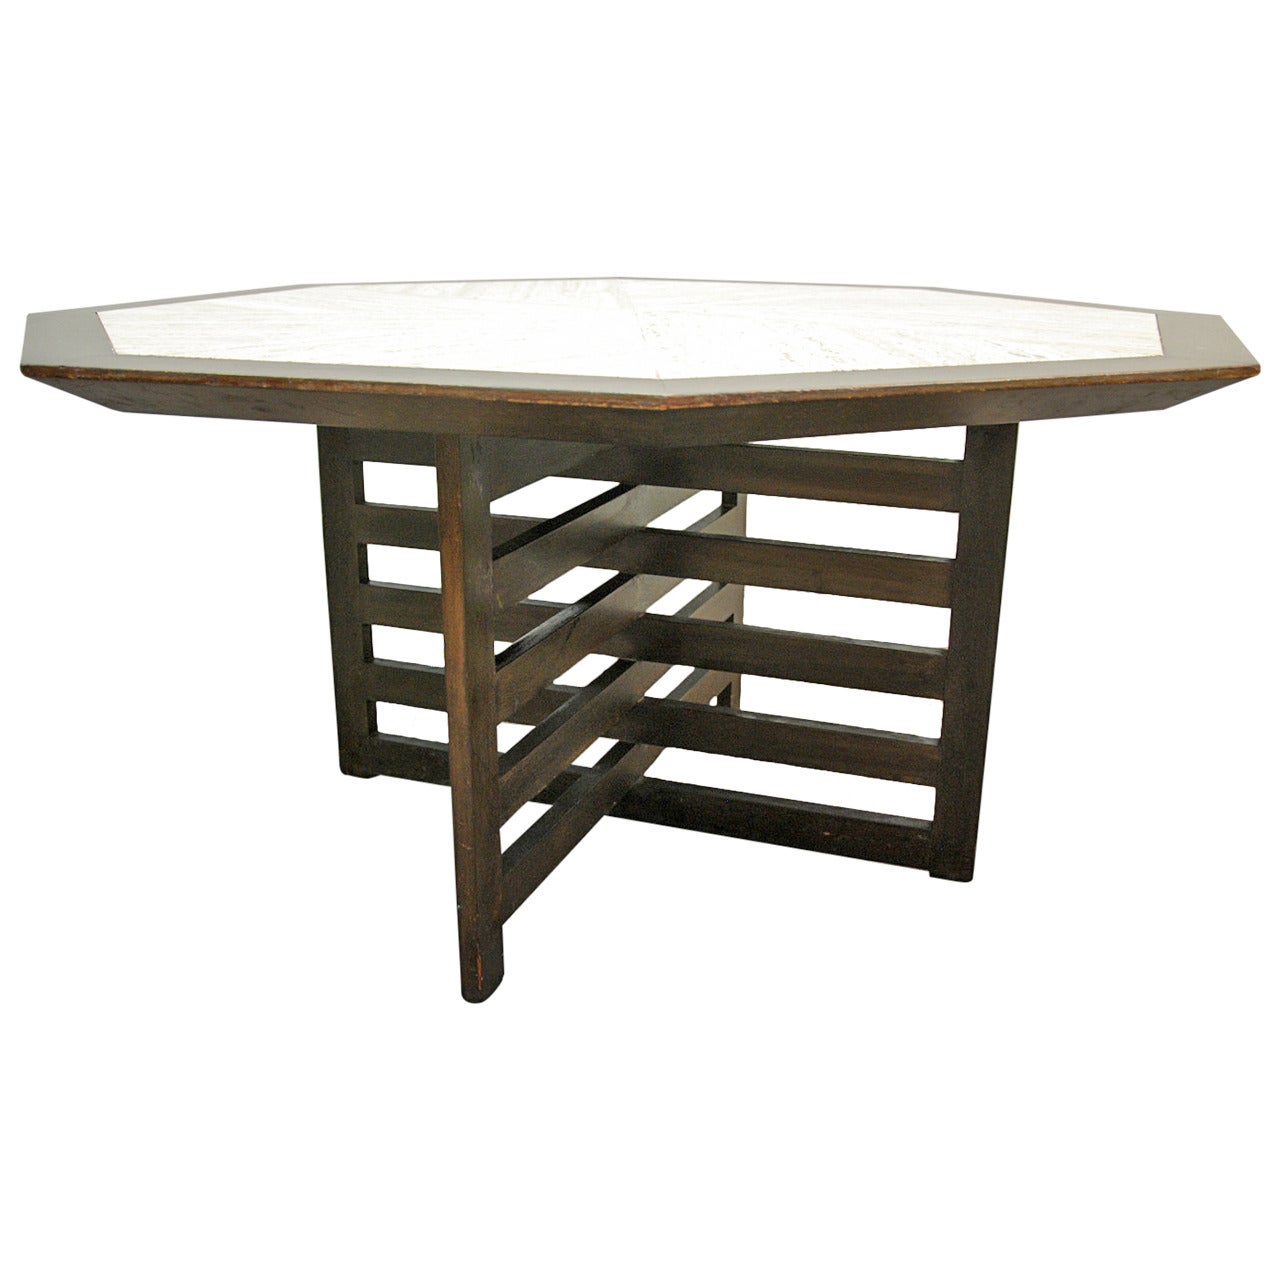 Harvey Probber Octagonal Travertine and Mahogany Dining Table, circa 1960 For Sale